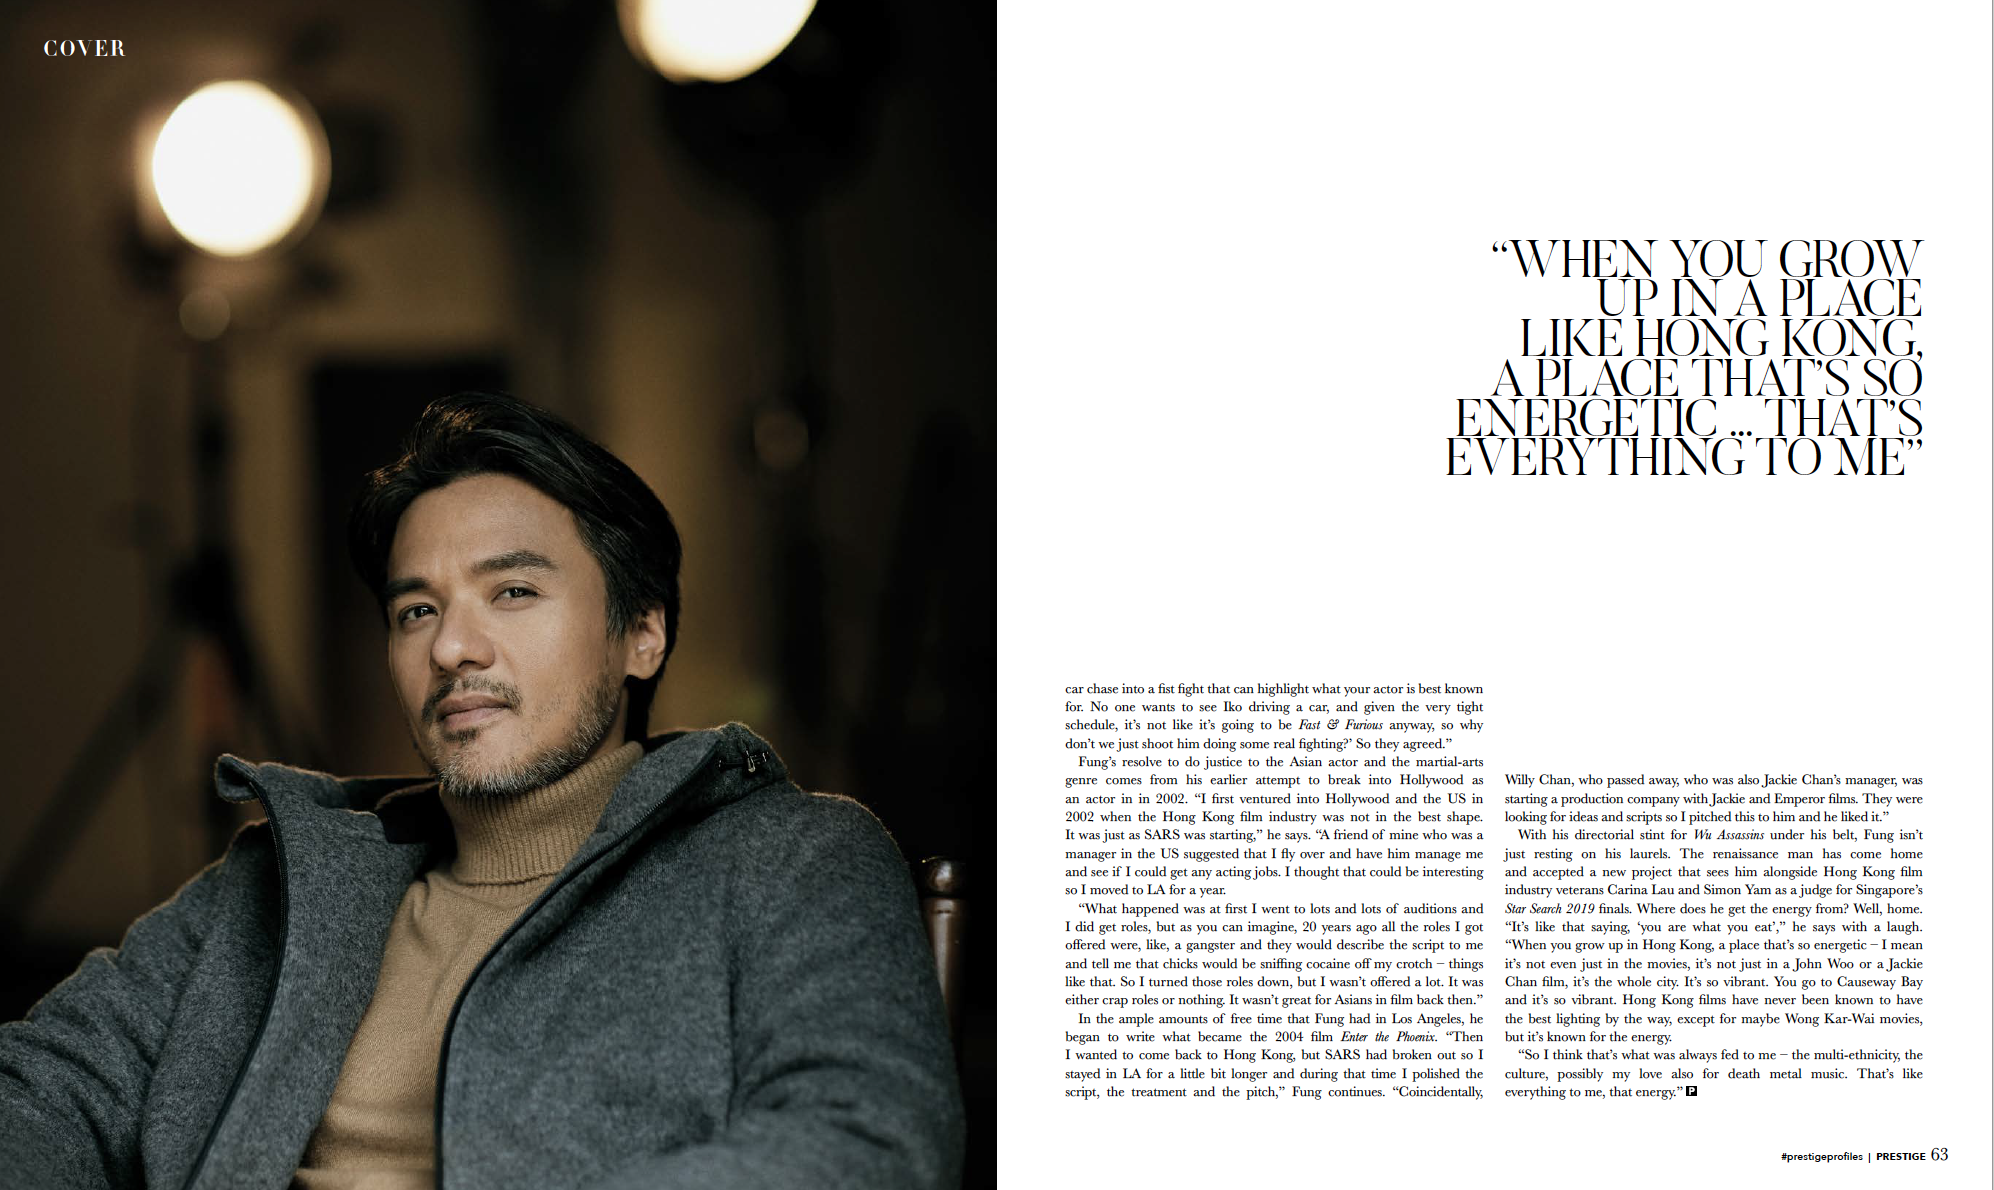 Stephen Fung Prestige November 2019 Cover Styling Shoot 5.png